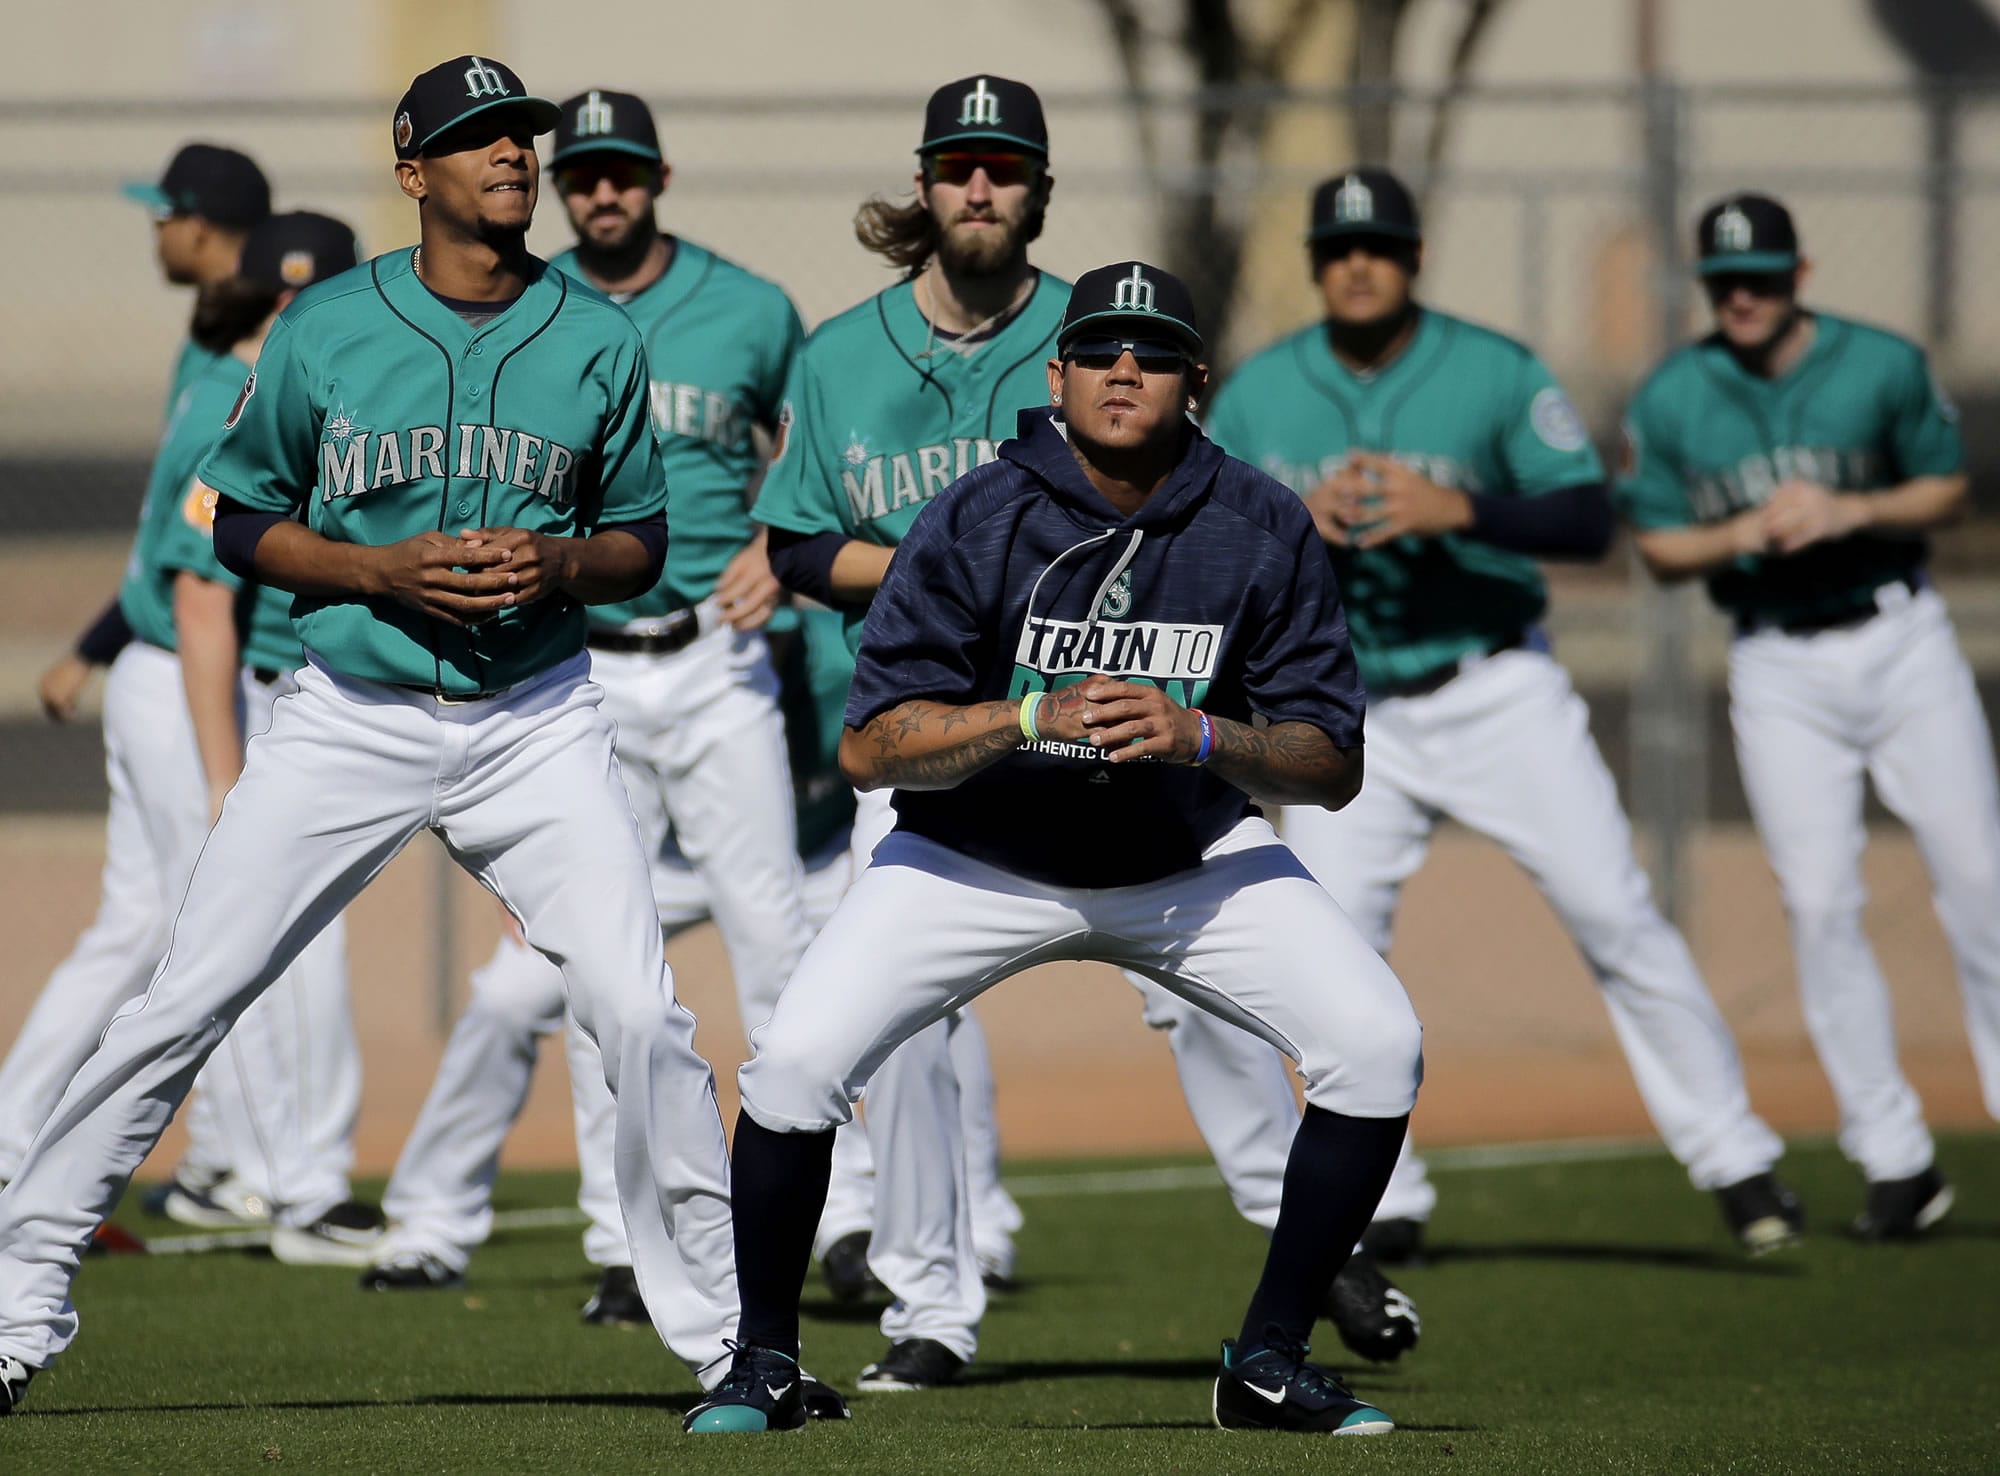 Mariners adopt ‘Whatever It Takes’ mantra for season The Columbian